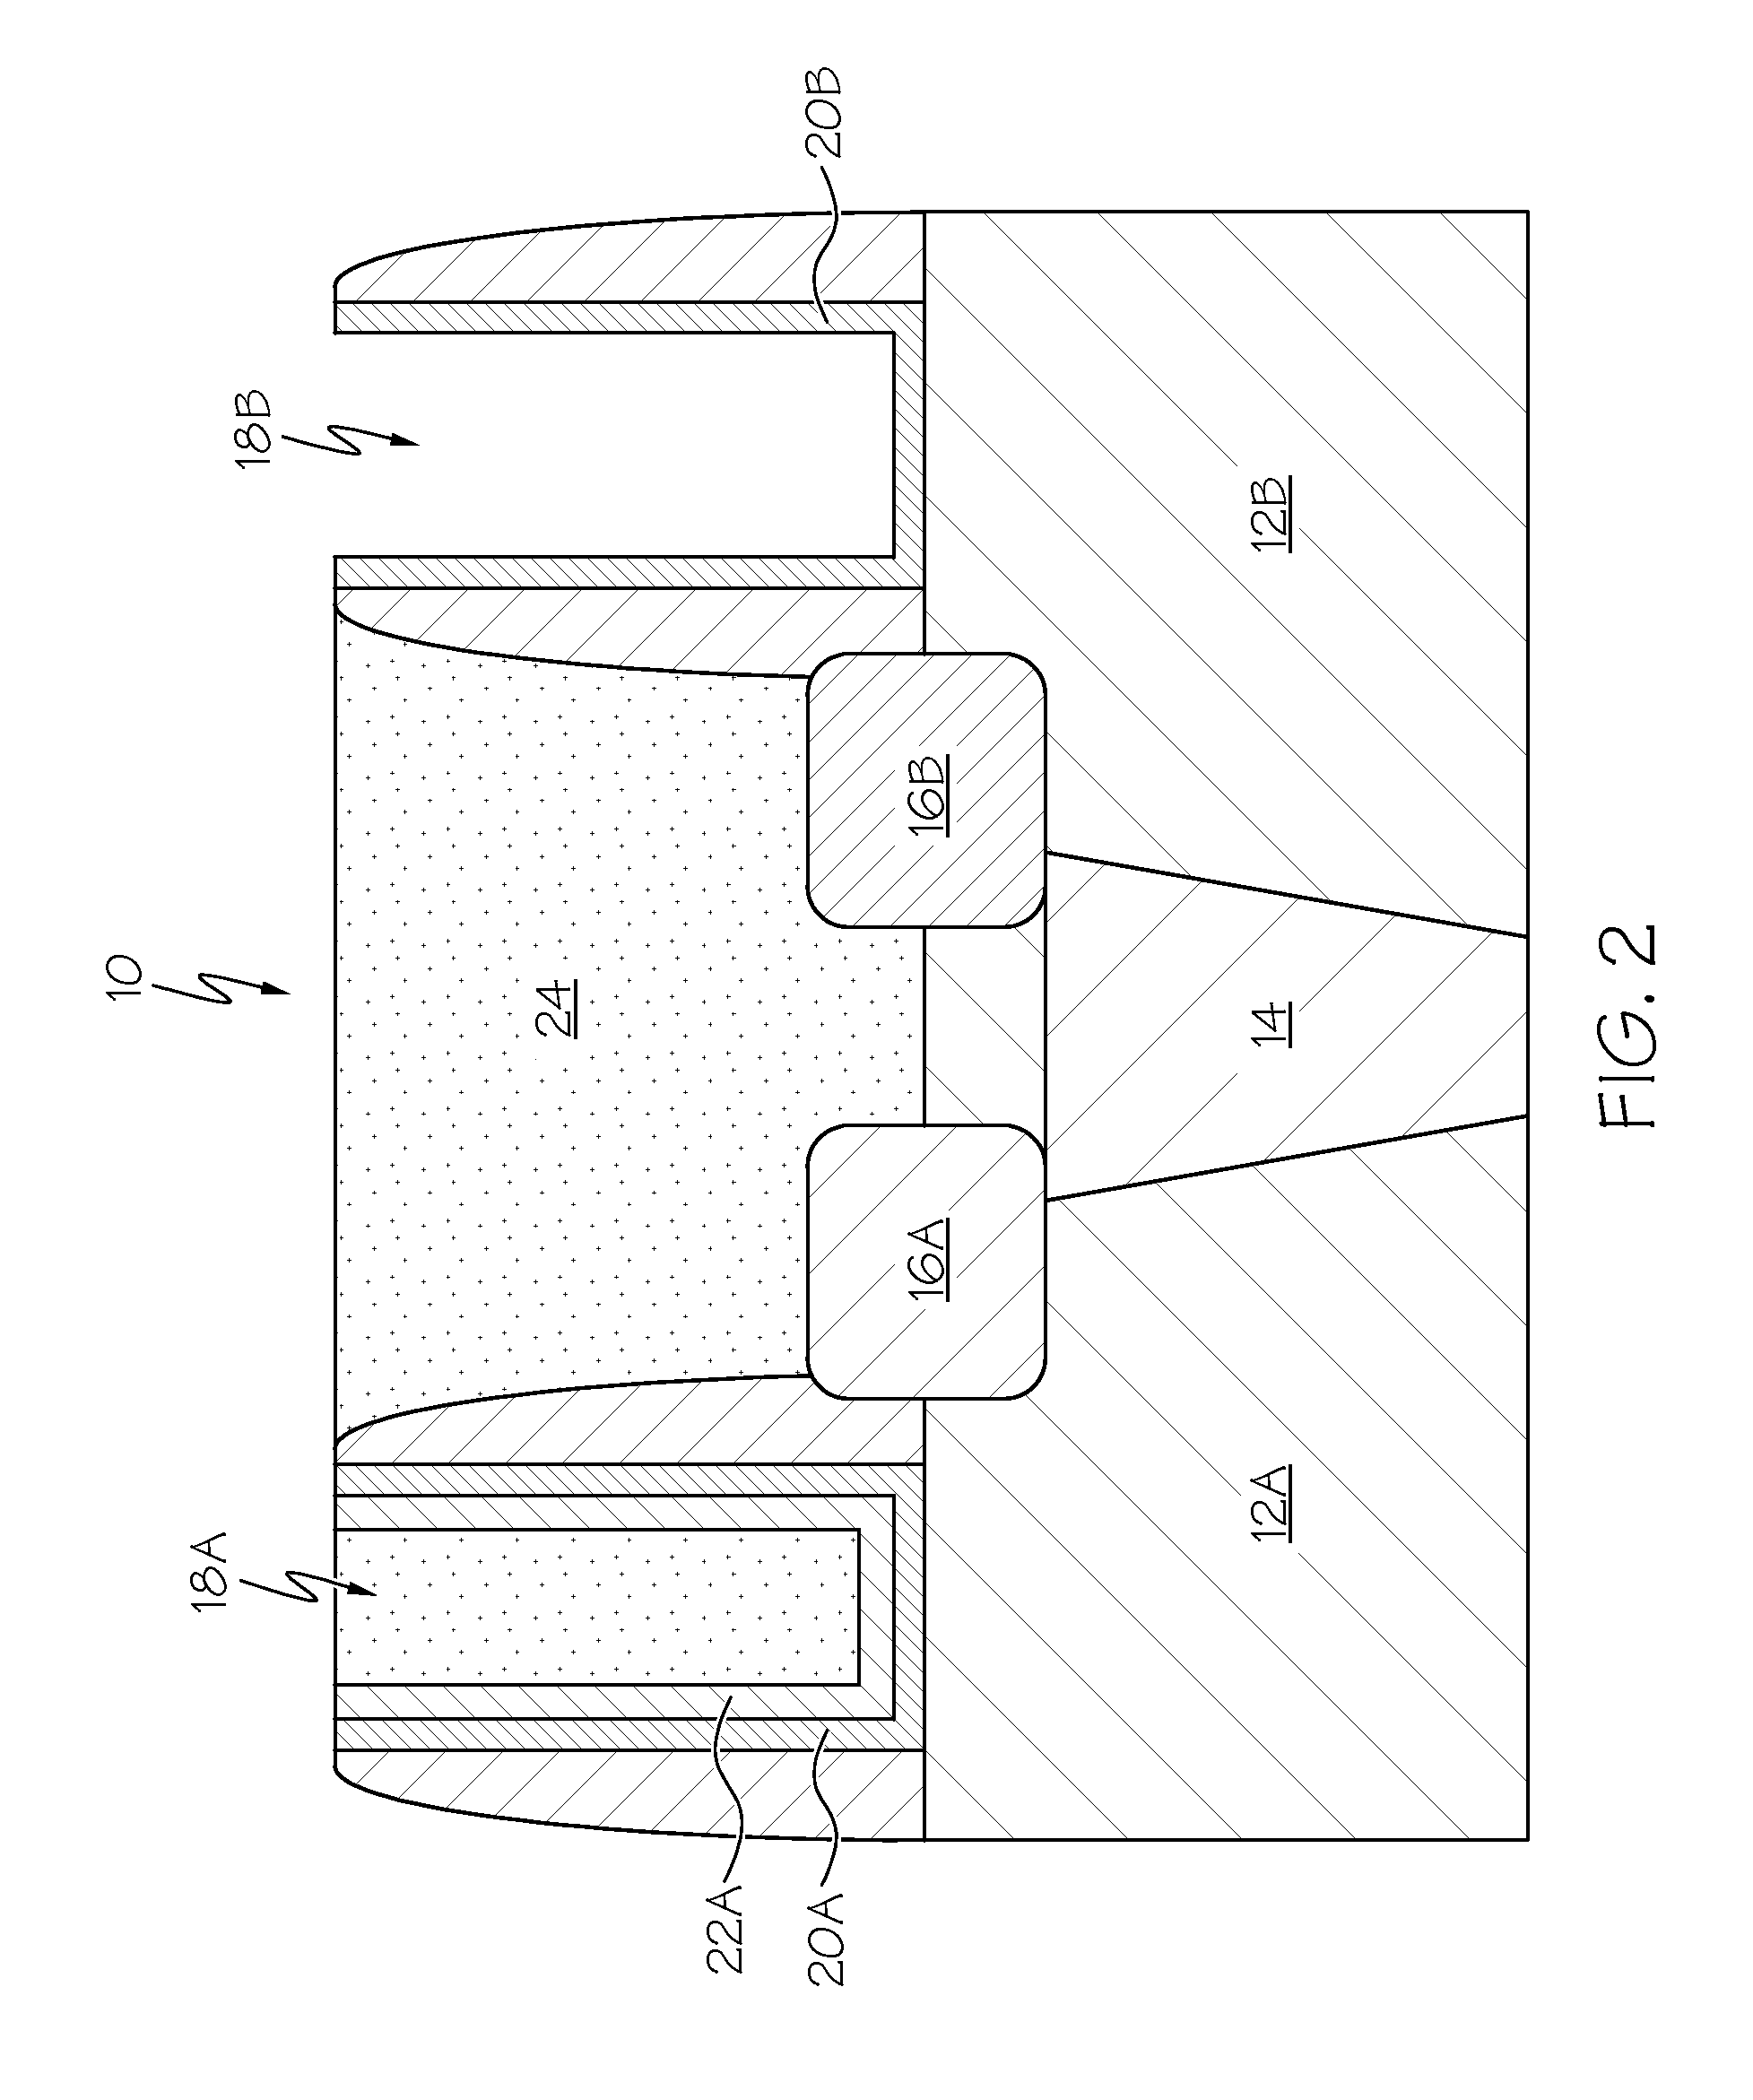 Semiconductor device incorporating a multi-function layer into gate stacks